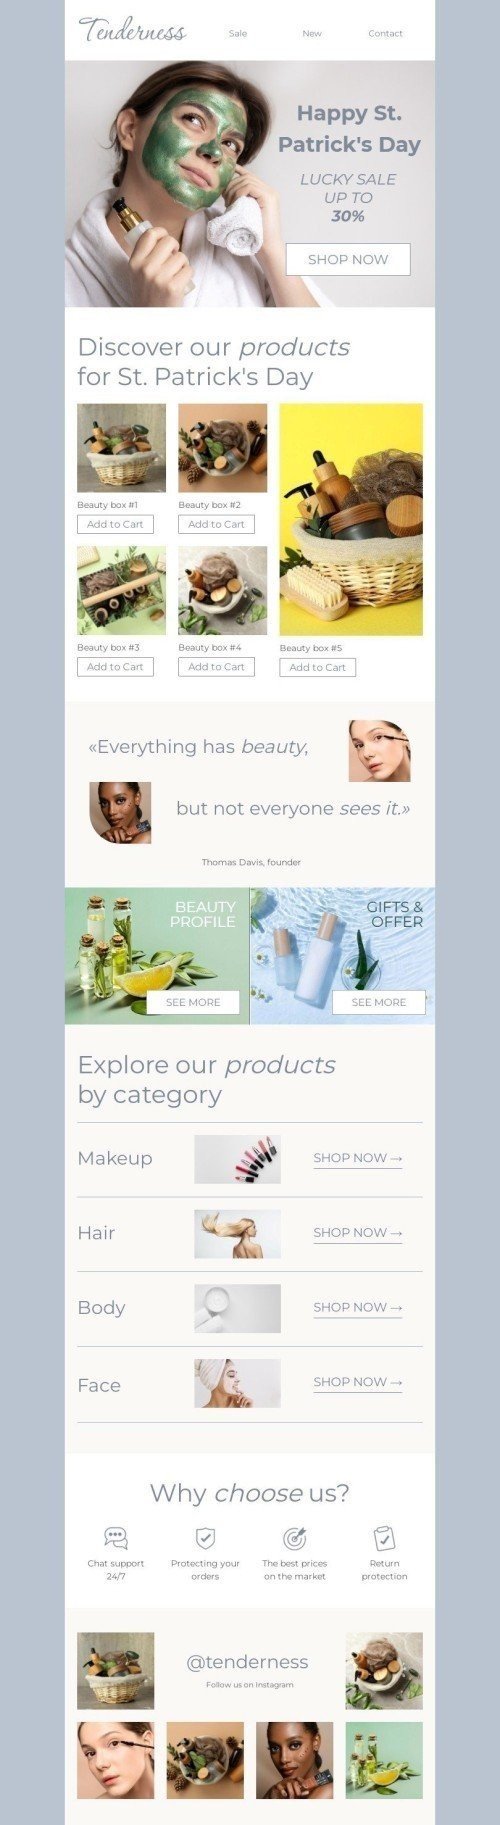 St. Patrick’s Day Email Template "Everything has beauty" for Beauty & Personal Care industry desktop view